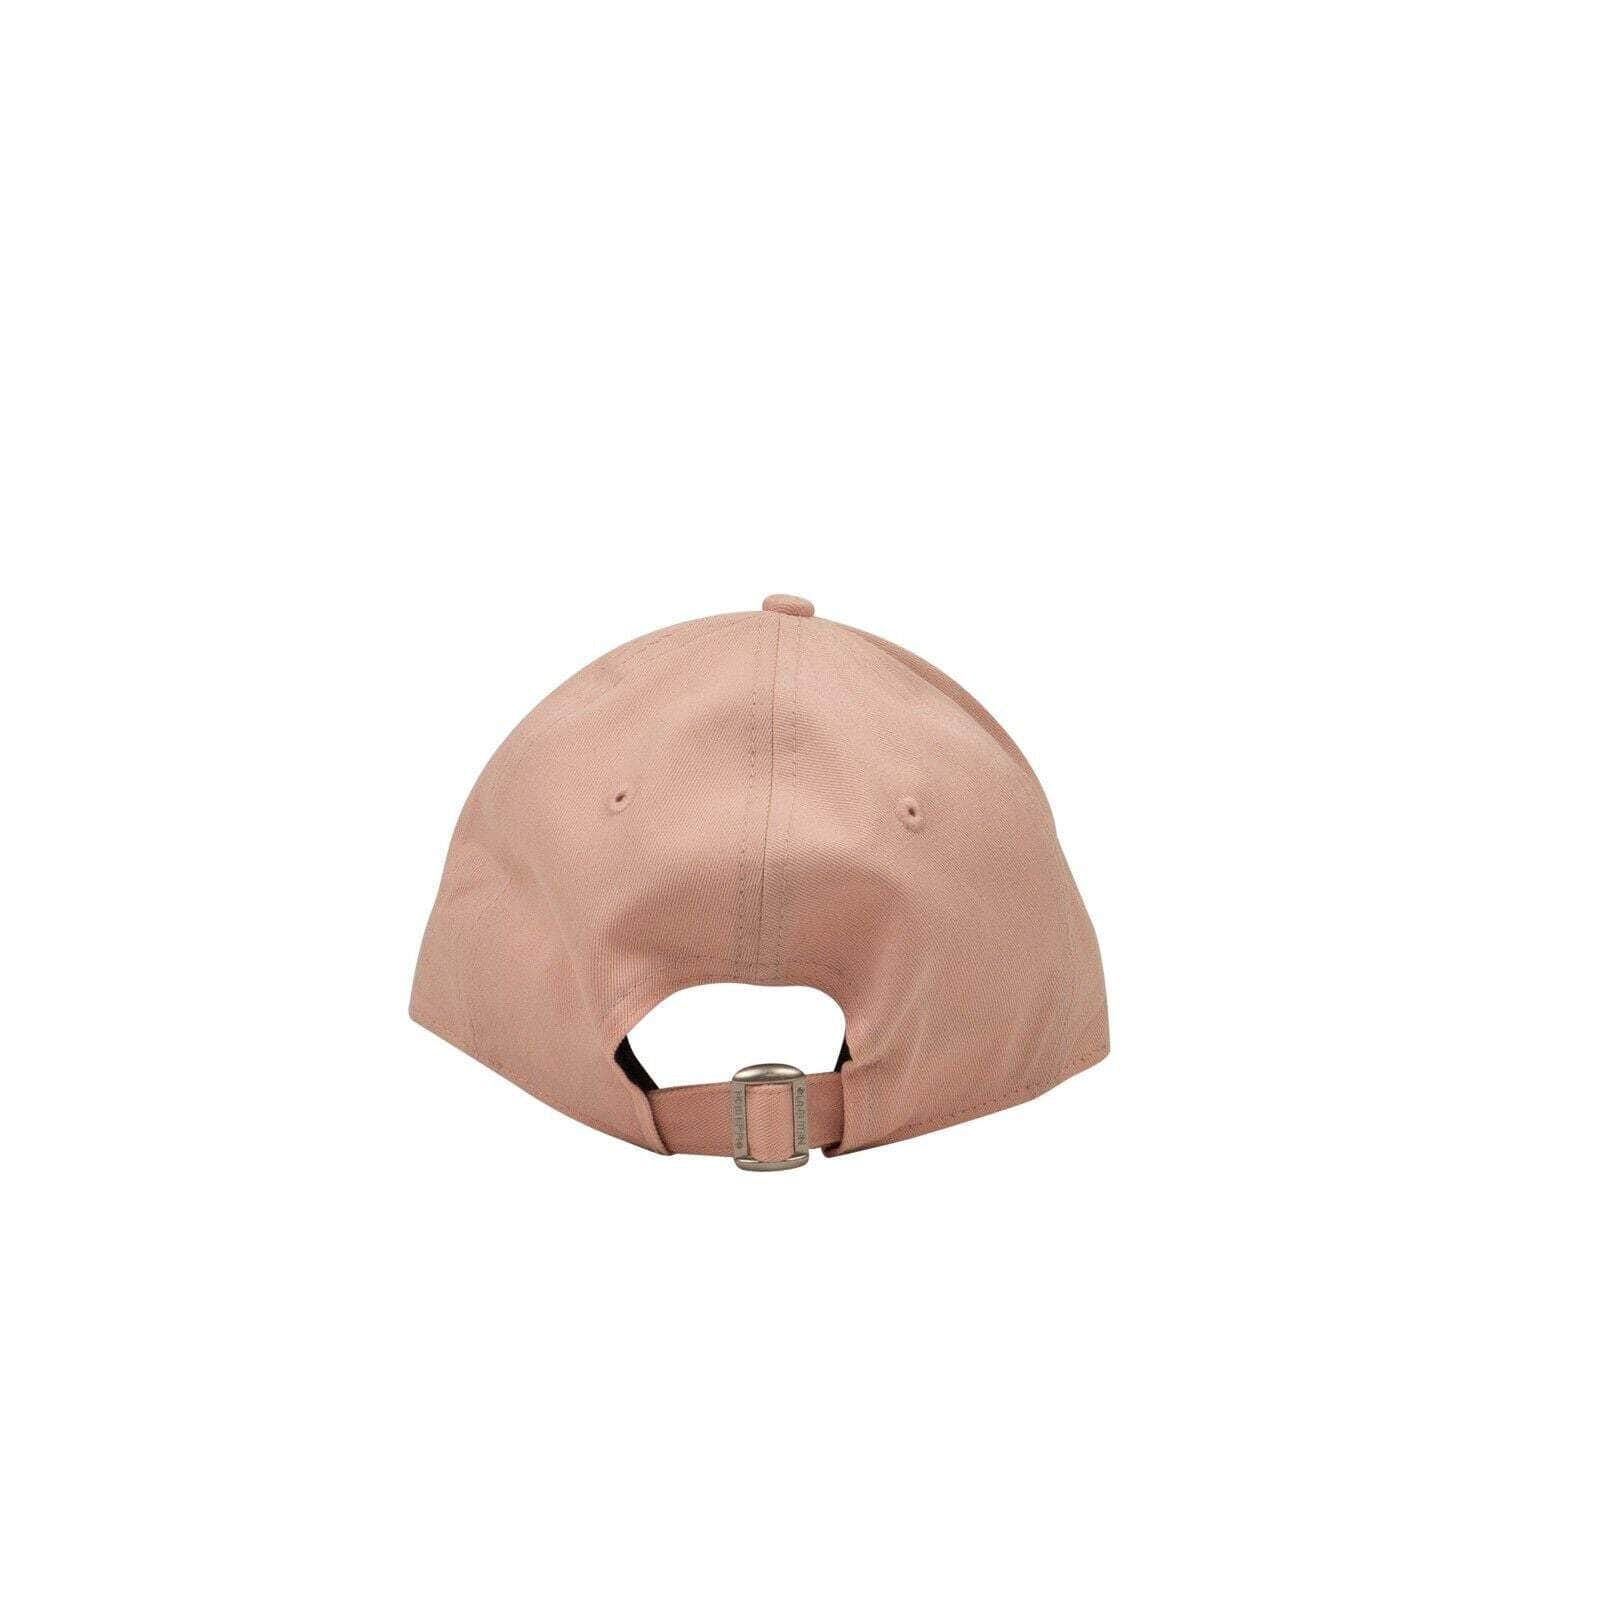 Artcheny artcheny, channelenable-all, chicmi, couponcollection, gender-mens, main-accessories, mens-shoes, shop375, size-os, under-250 OS Pink Cotton New Era 9Forty Hat 95-ART-3008/OS 95-ART-3008/OS